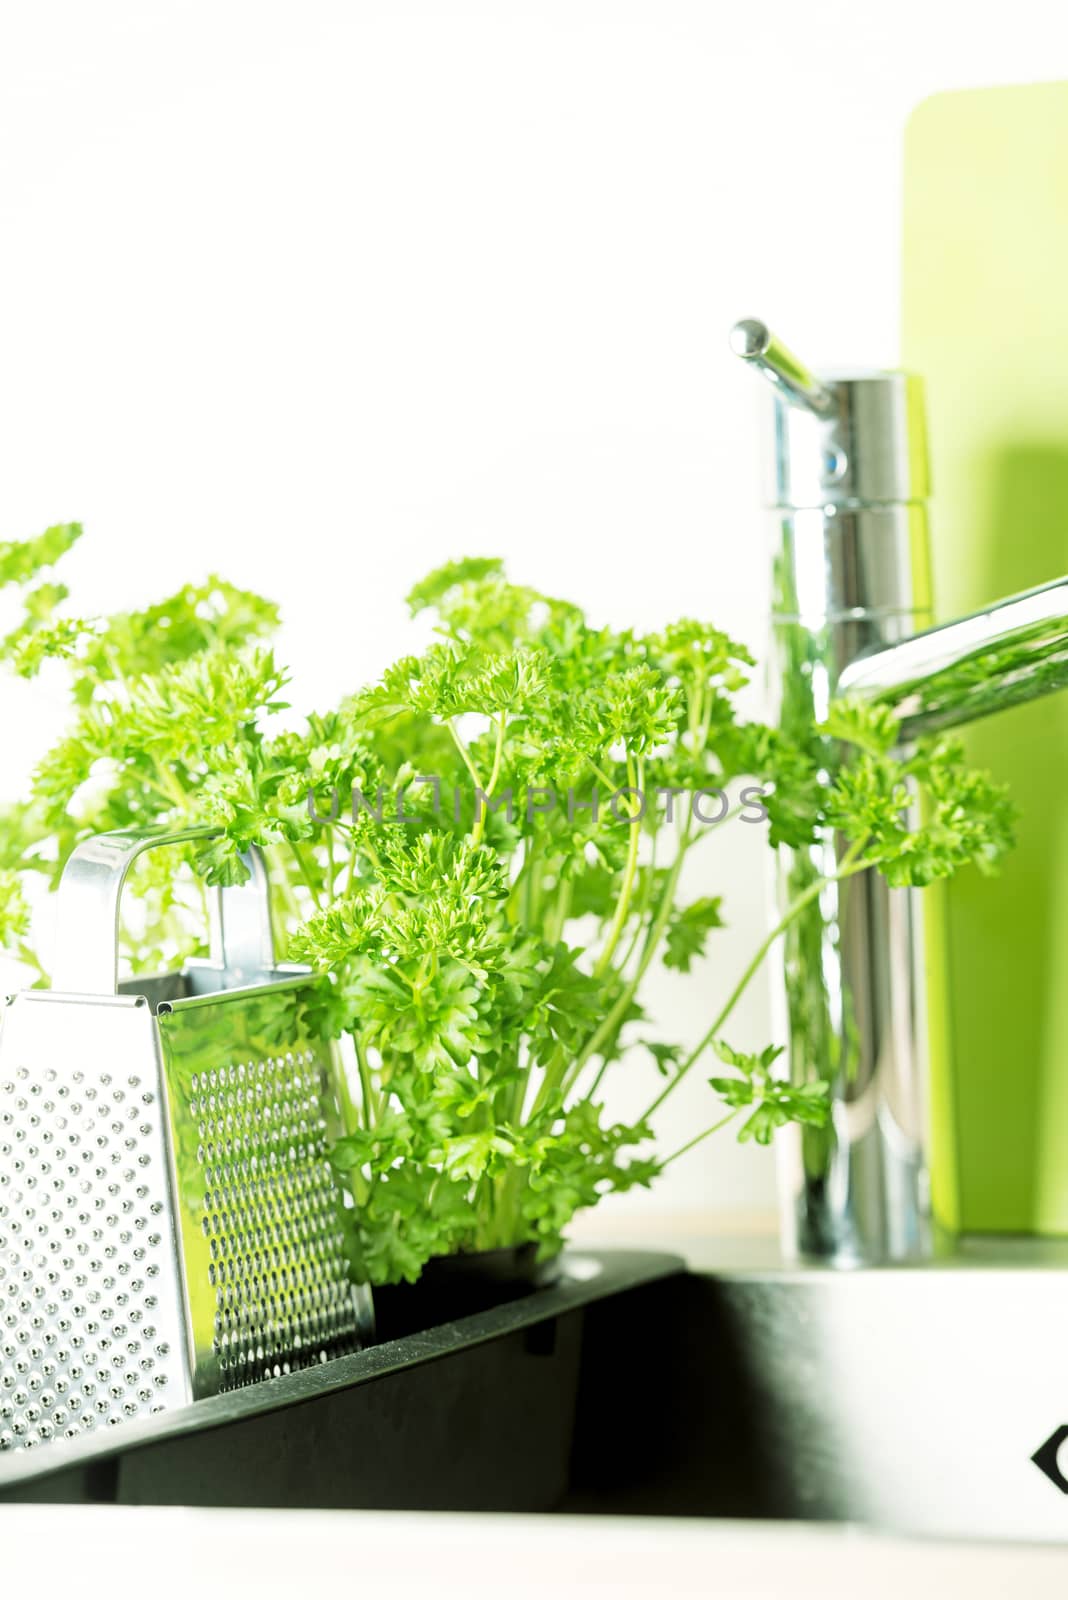 At kitchen: faucet, grater and fresh parsley by Nanisimova